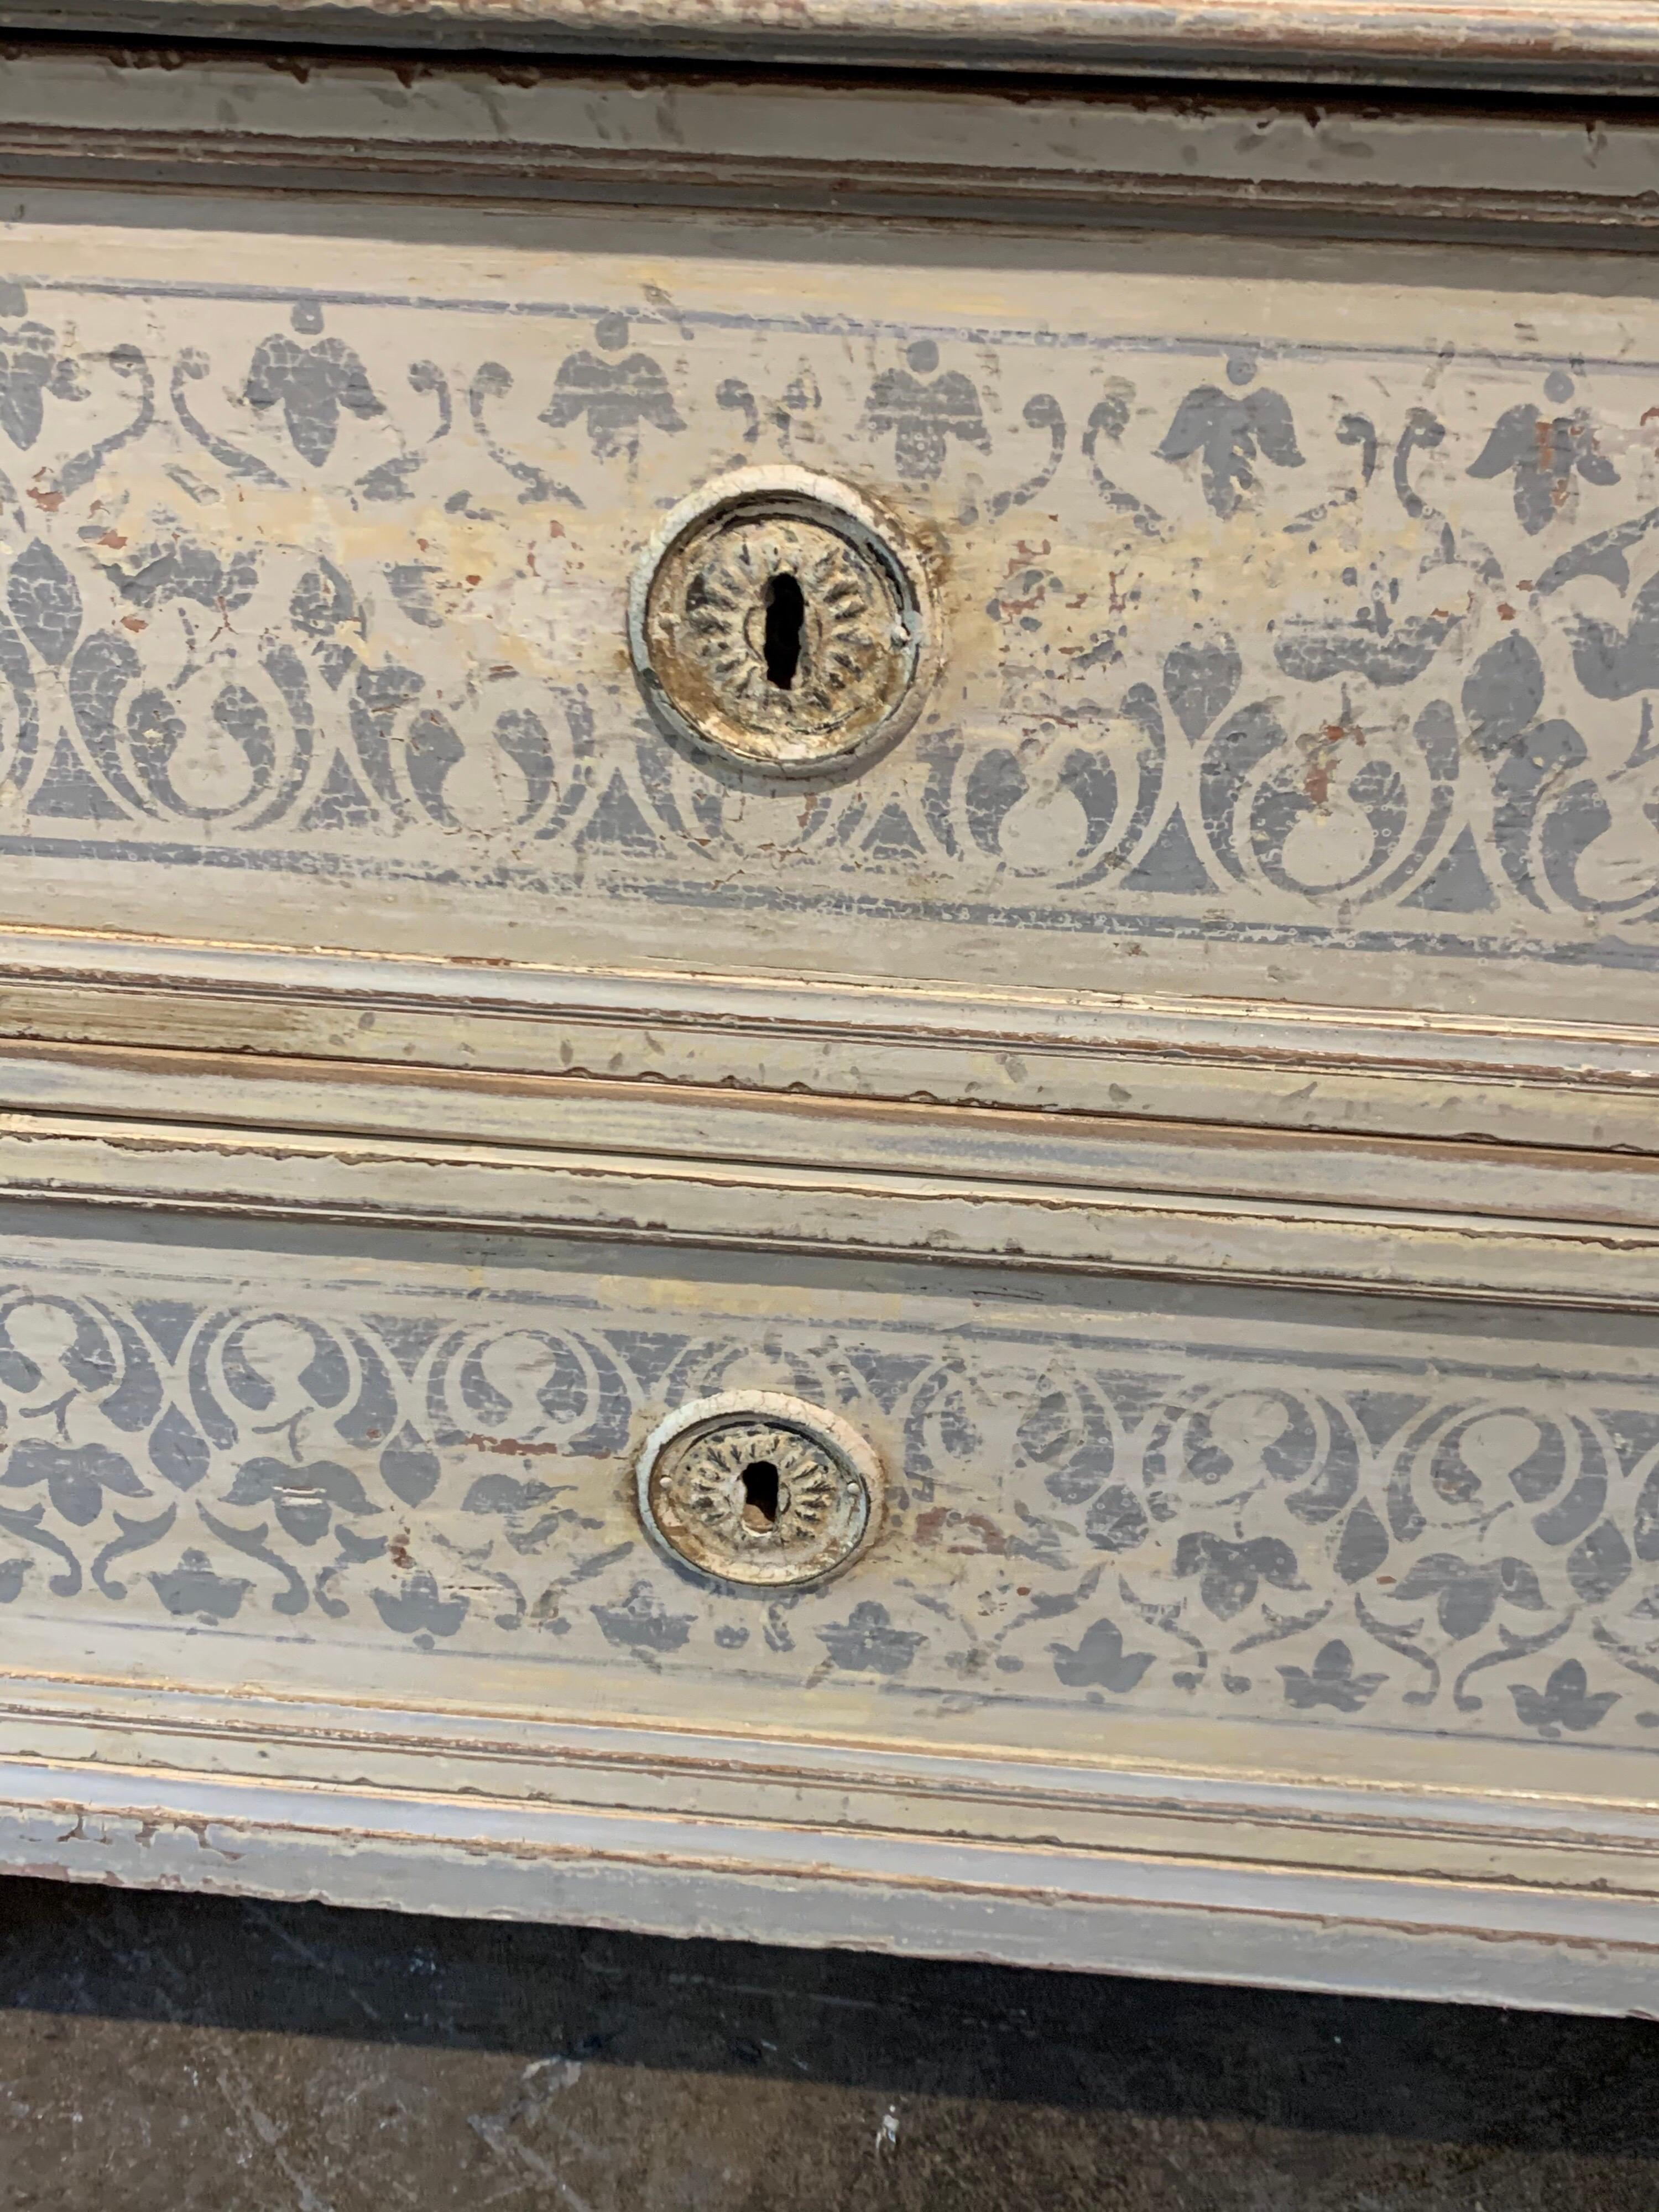 Decorative 19th century French Louis XVI carved and painted commode. Nice floral pattern painted in grey on the drawers and sides of the cabinet. Lovely!